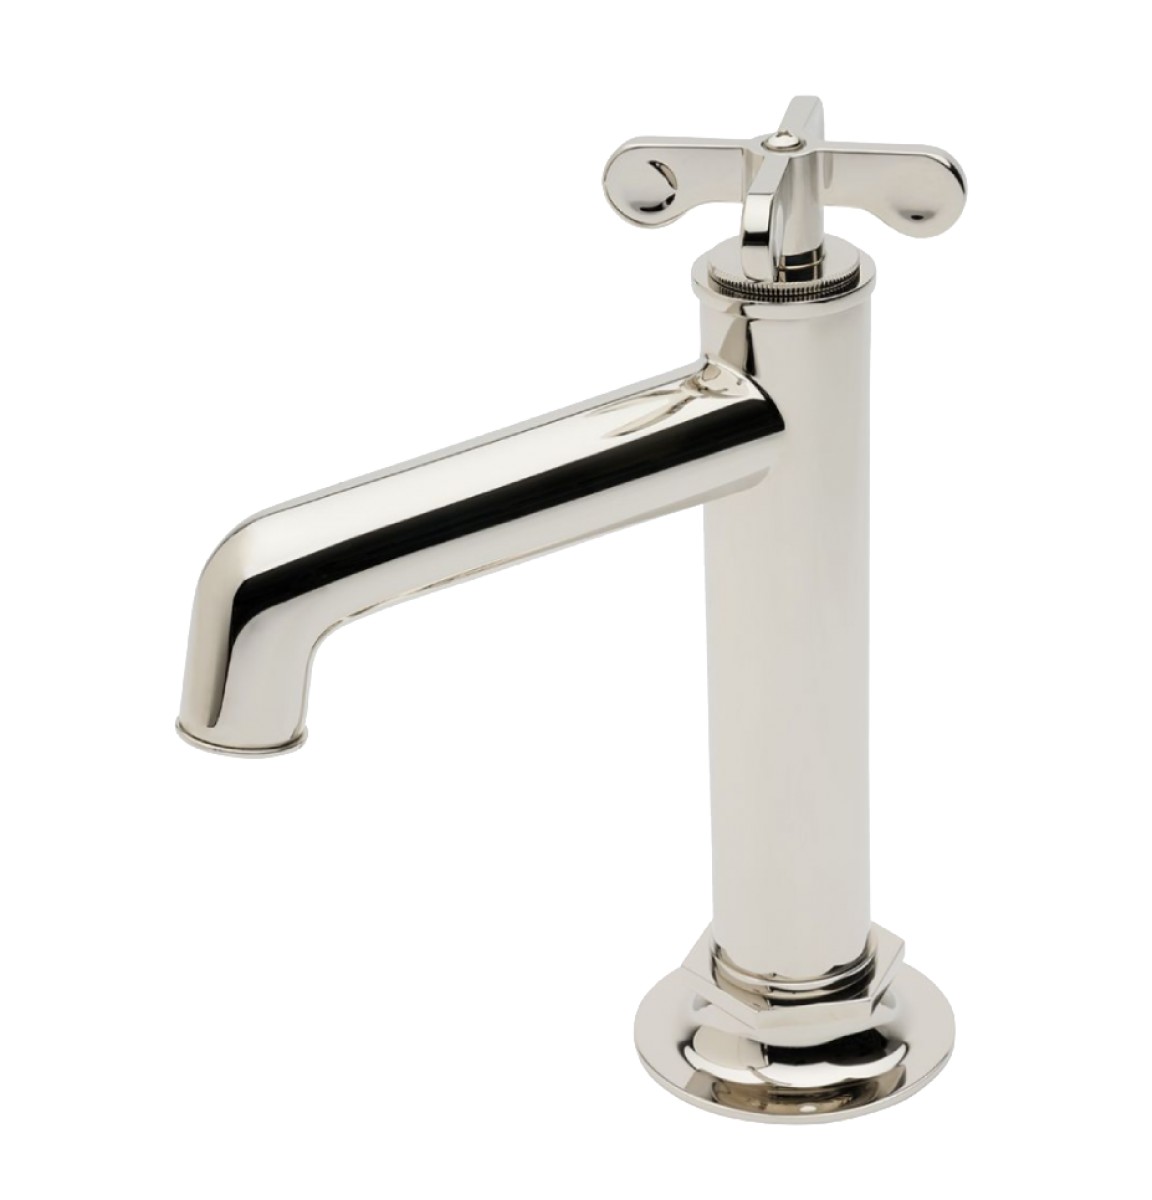 Henry One Hole Bar Faucet with Cross Handle